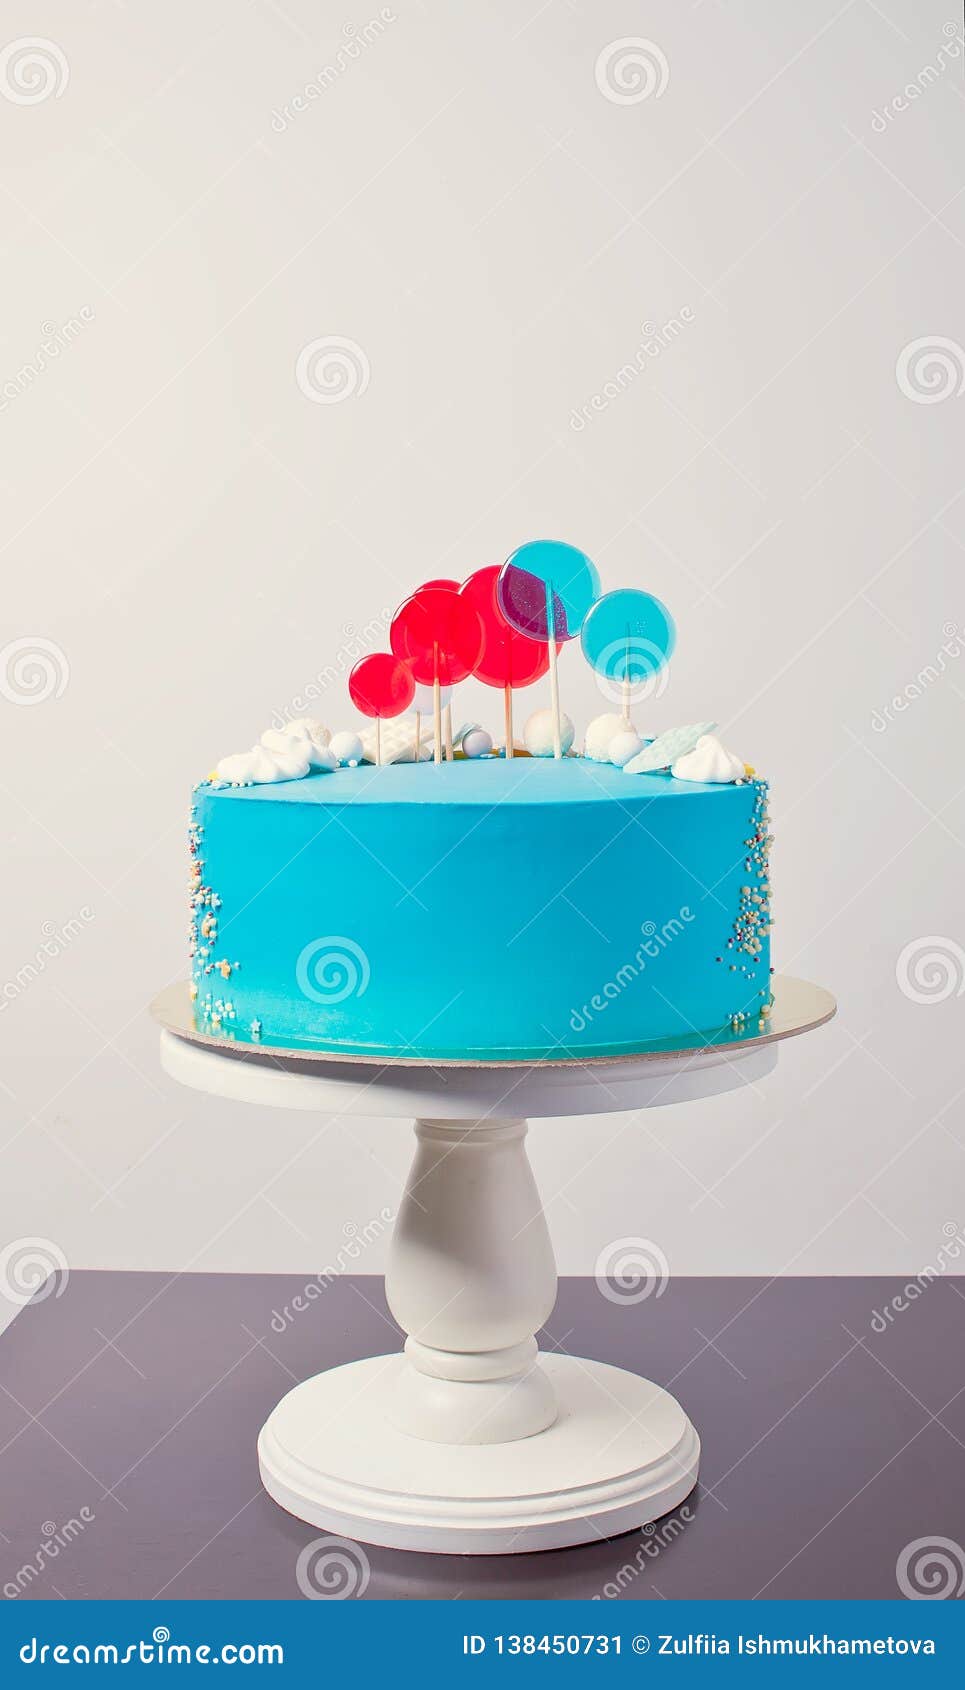 Discover 204+ blue candy cake best